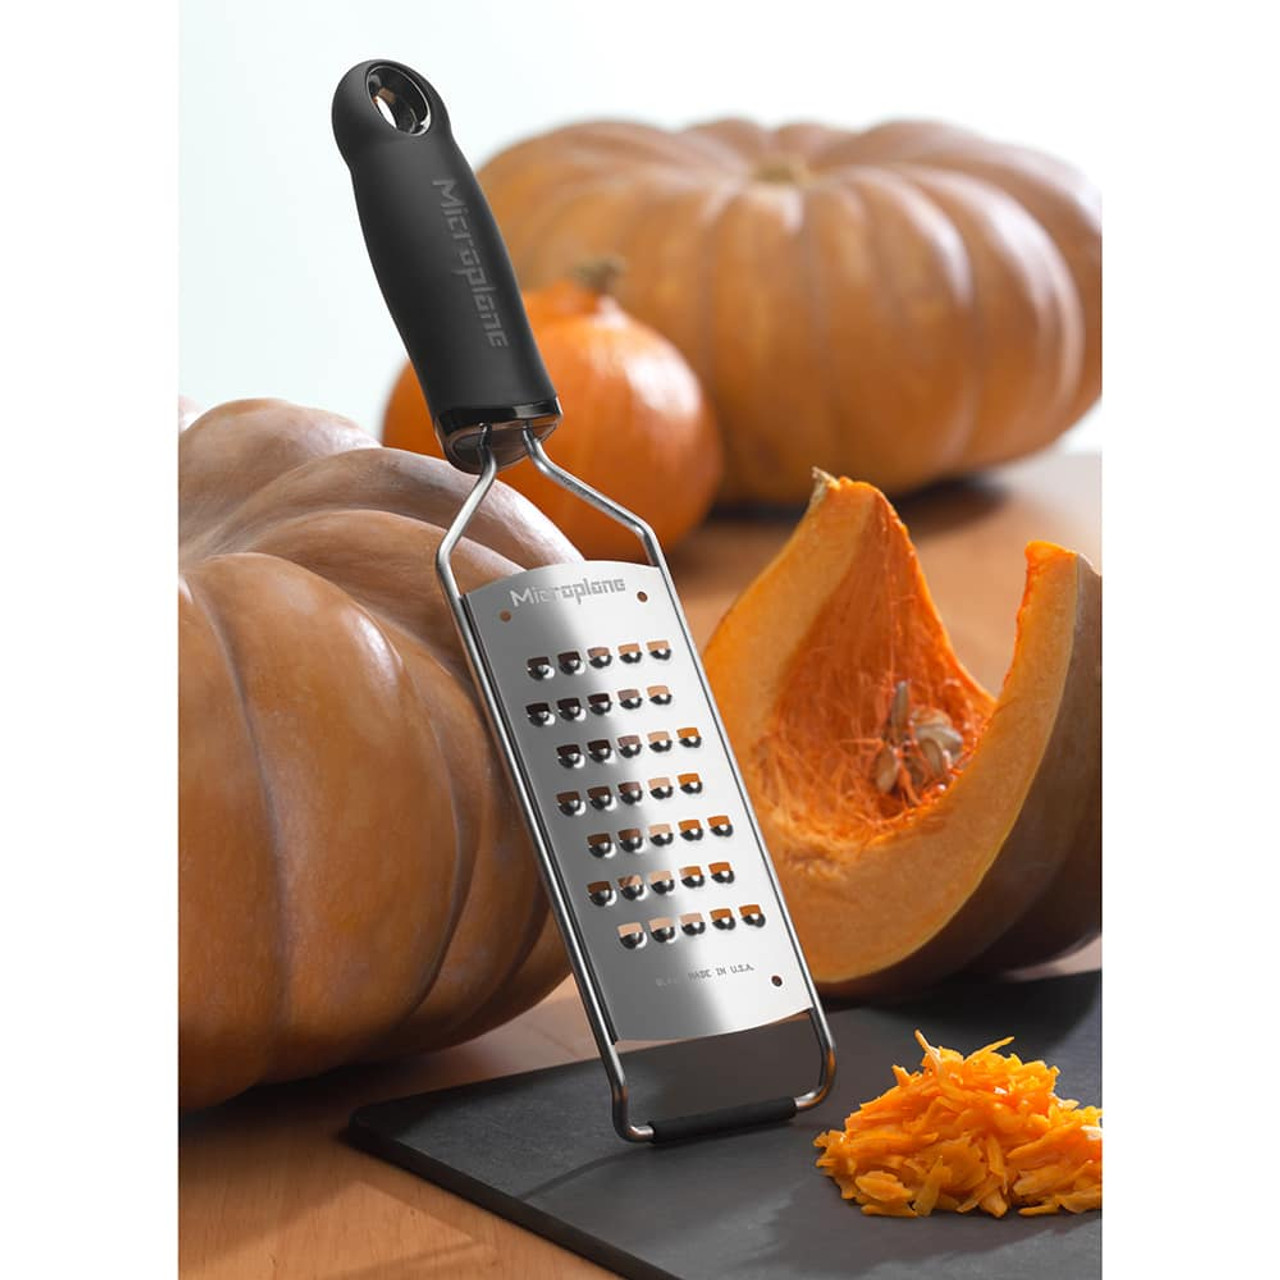 https://cdn11.bigcommerce.com/s-hccytny0od/images/stencil/1280x1280/products/1209/2853/microplane-gourmet-series-extra-coarse-grater-1__35677.1589999638.jpg?c=2?imbypass=on